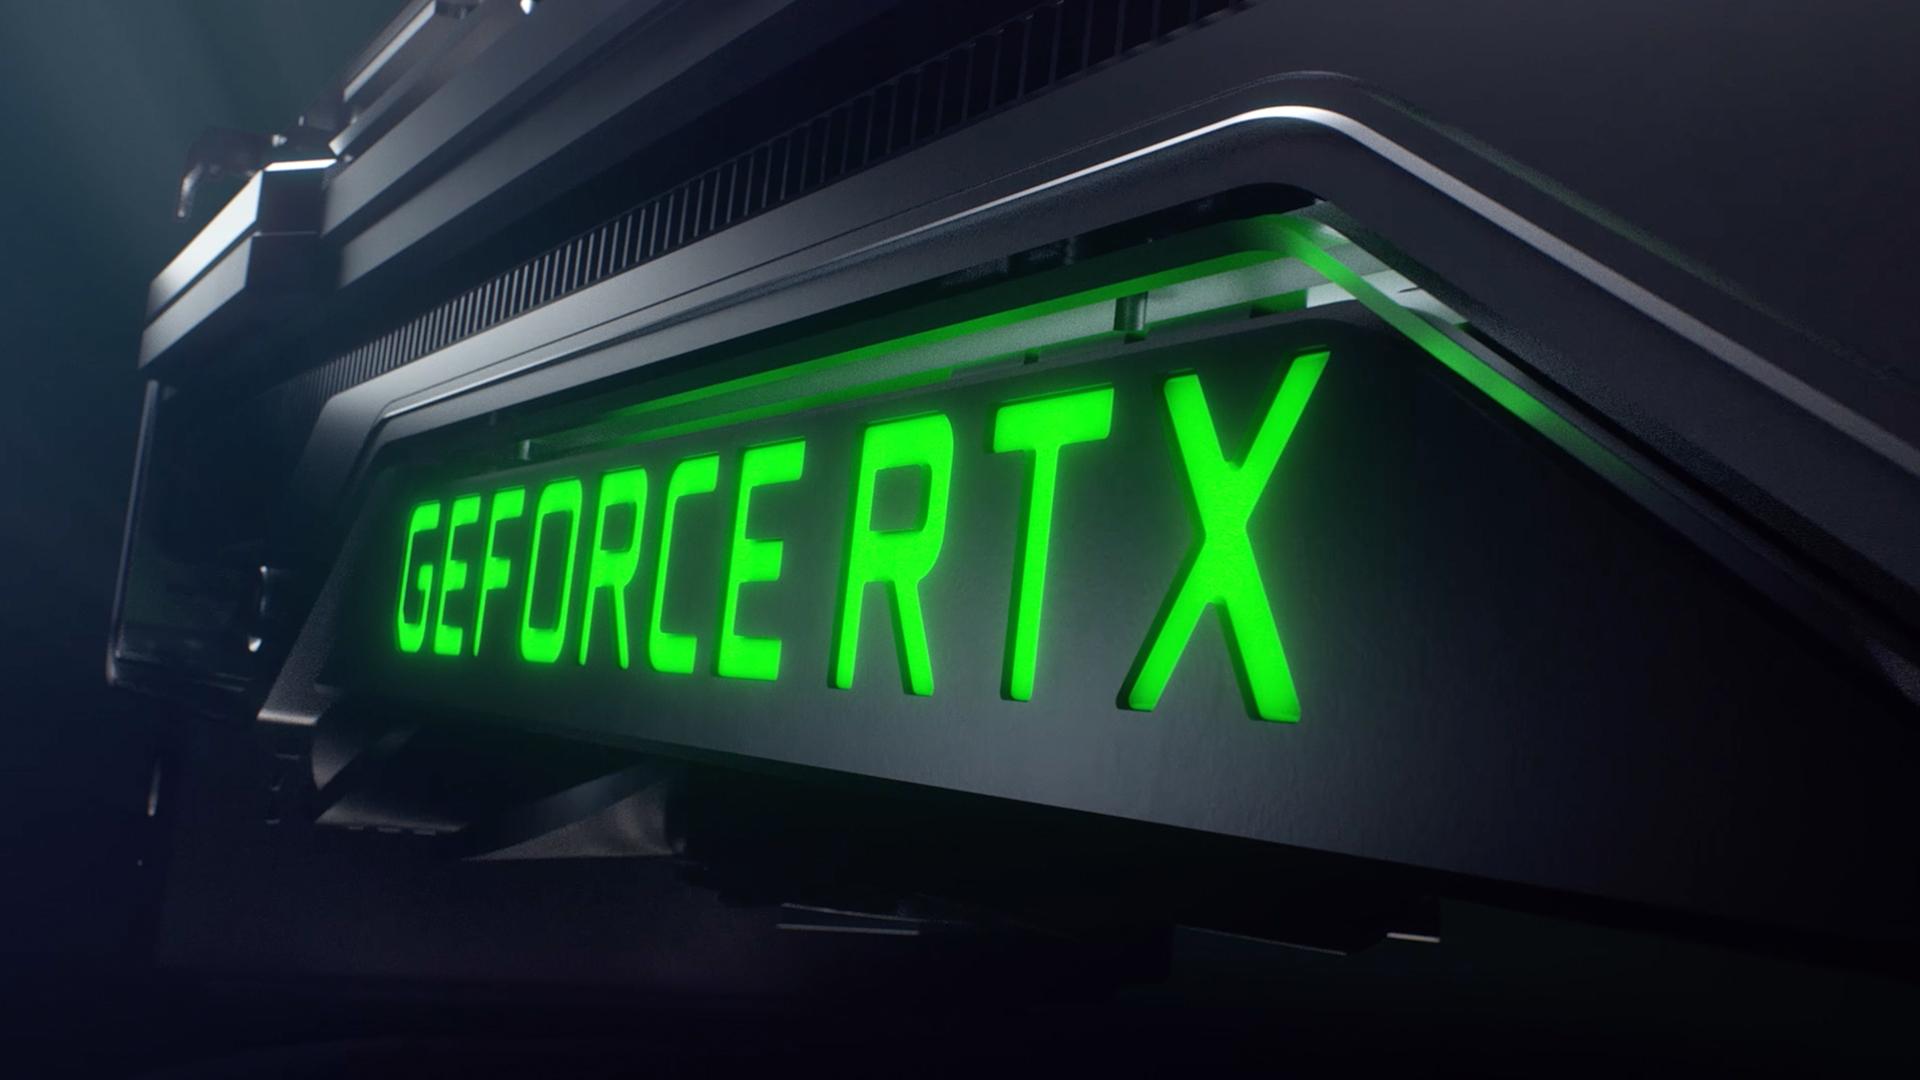 NVIDIA GeForce RTX Wallpapers - Wallpaper Cave